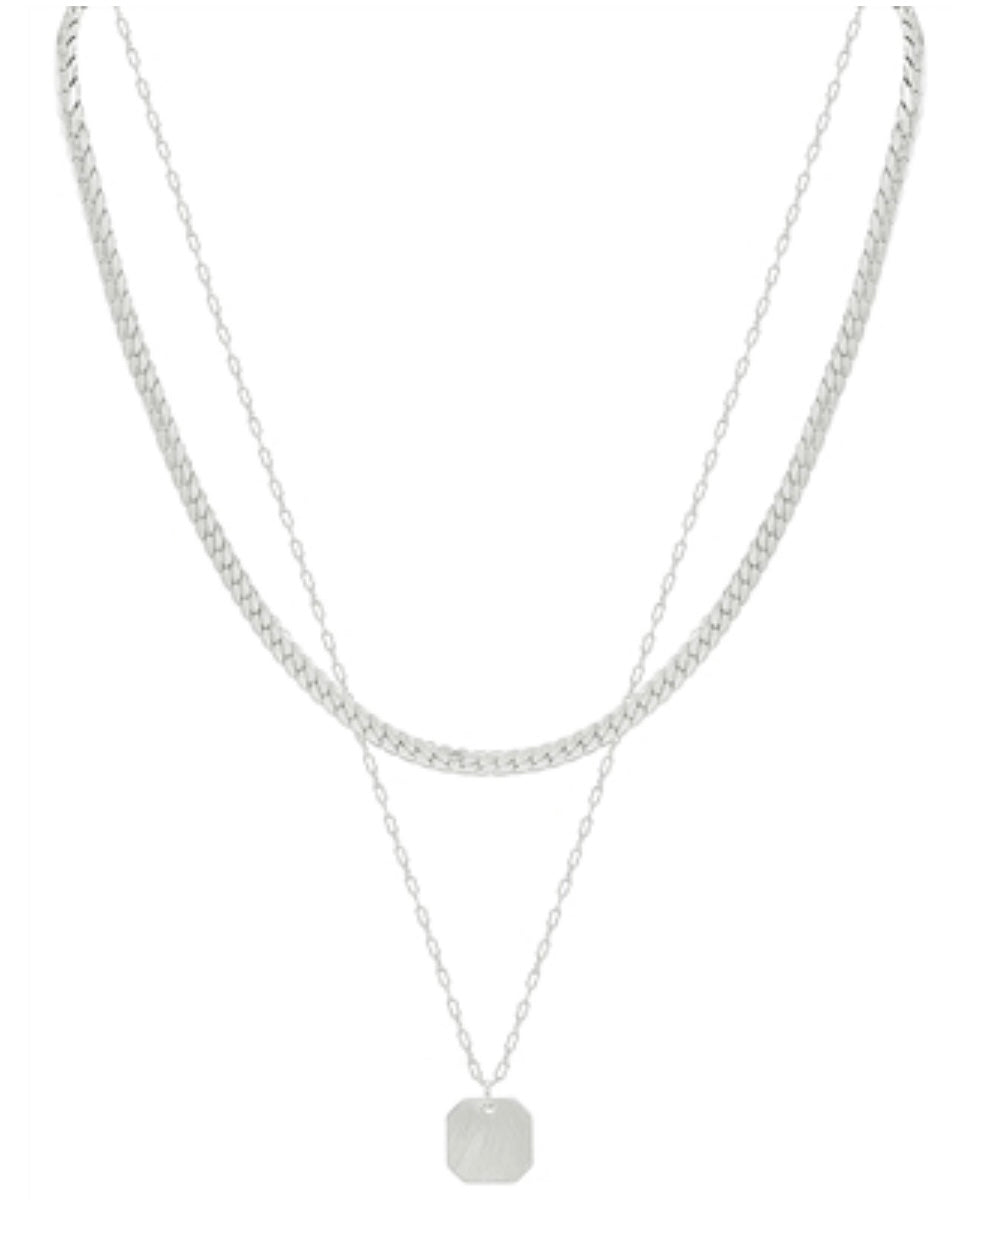 SNAKE CHAIN LAYERED NECKLACE - MATTE SILVER